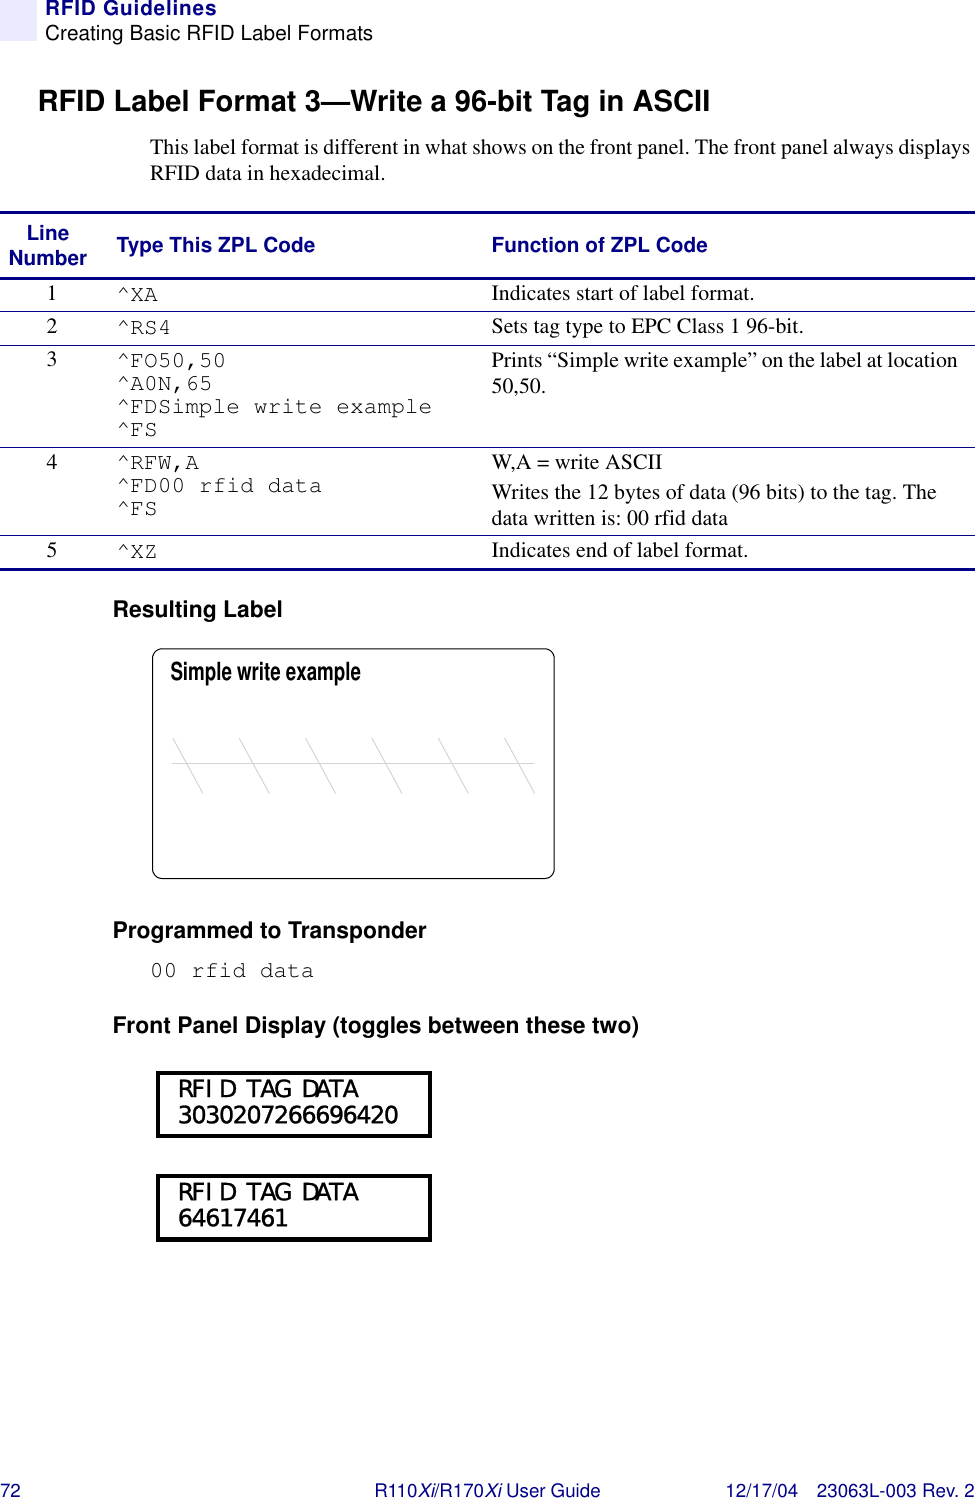 72 R110Xi/R170Xi User Guide 12/17/04 23063L-003 Rev. 2RFID GuidelinesCreating Basic RFID Label FormatsRFID Label Format 3—Write a 96-bit Tag in ASCIIThis label format is different in what shows on the front panel. The front panel always displays RFID data in hexadecimal.Resulting LabelProgrammed to Transponder00 rfid dataFront Panel Display (toggles between these two)Line Number Type This ZPL Code Function of ZPL Code1^XA Indicates start of label format.2^RS4 Sets tag type to EPC Class 1 96-bit.3^FO50,50^A0N,65^FDSimple write example^FSPrints “Simple write example” on the label at location 50,50.4^RFW,A^FD00 rfid data^FSW,A = write ASCIIWrites the 12 bytes of data (96 bits) to the tag. The data written is: 00 rfid data5^XZ Indicates end of label format.Simple write example RFID TAG DATA 3030207266696420 RFID TAG DATA 64617461